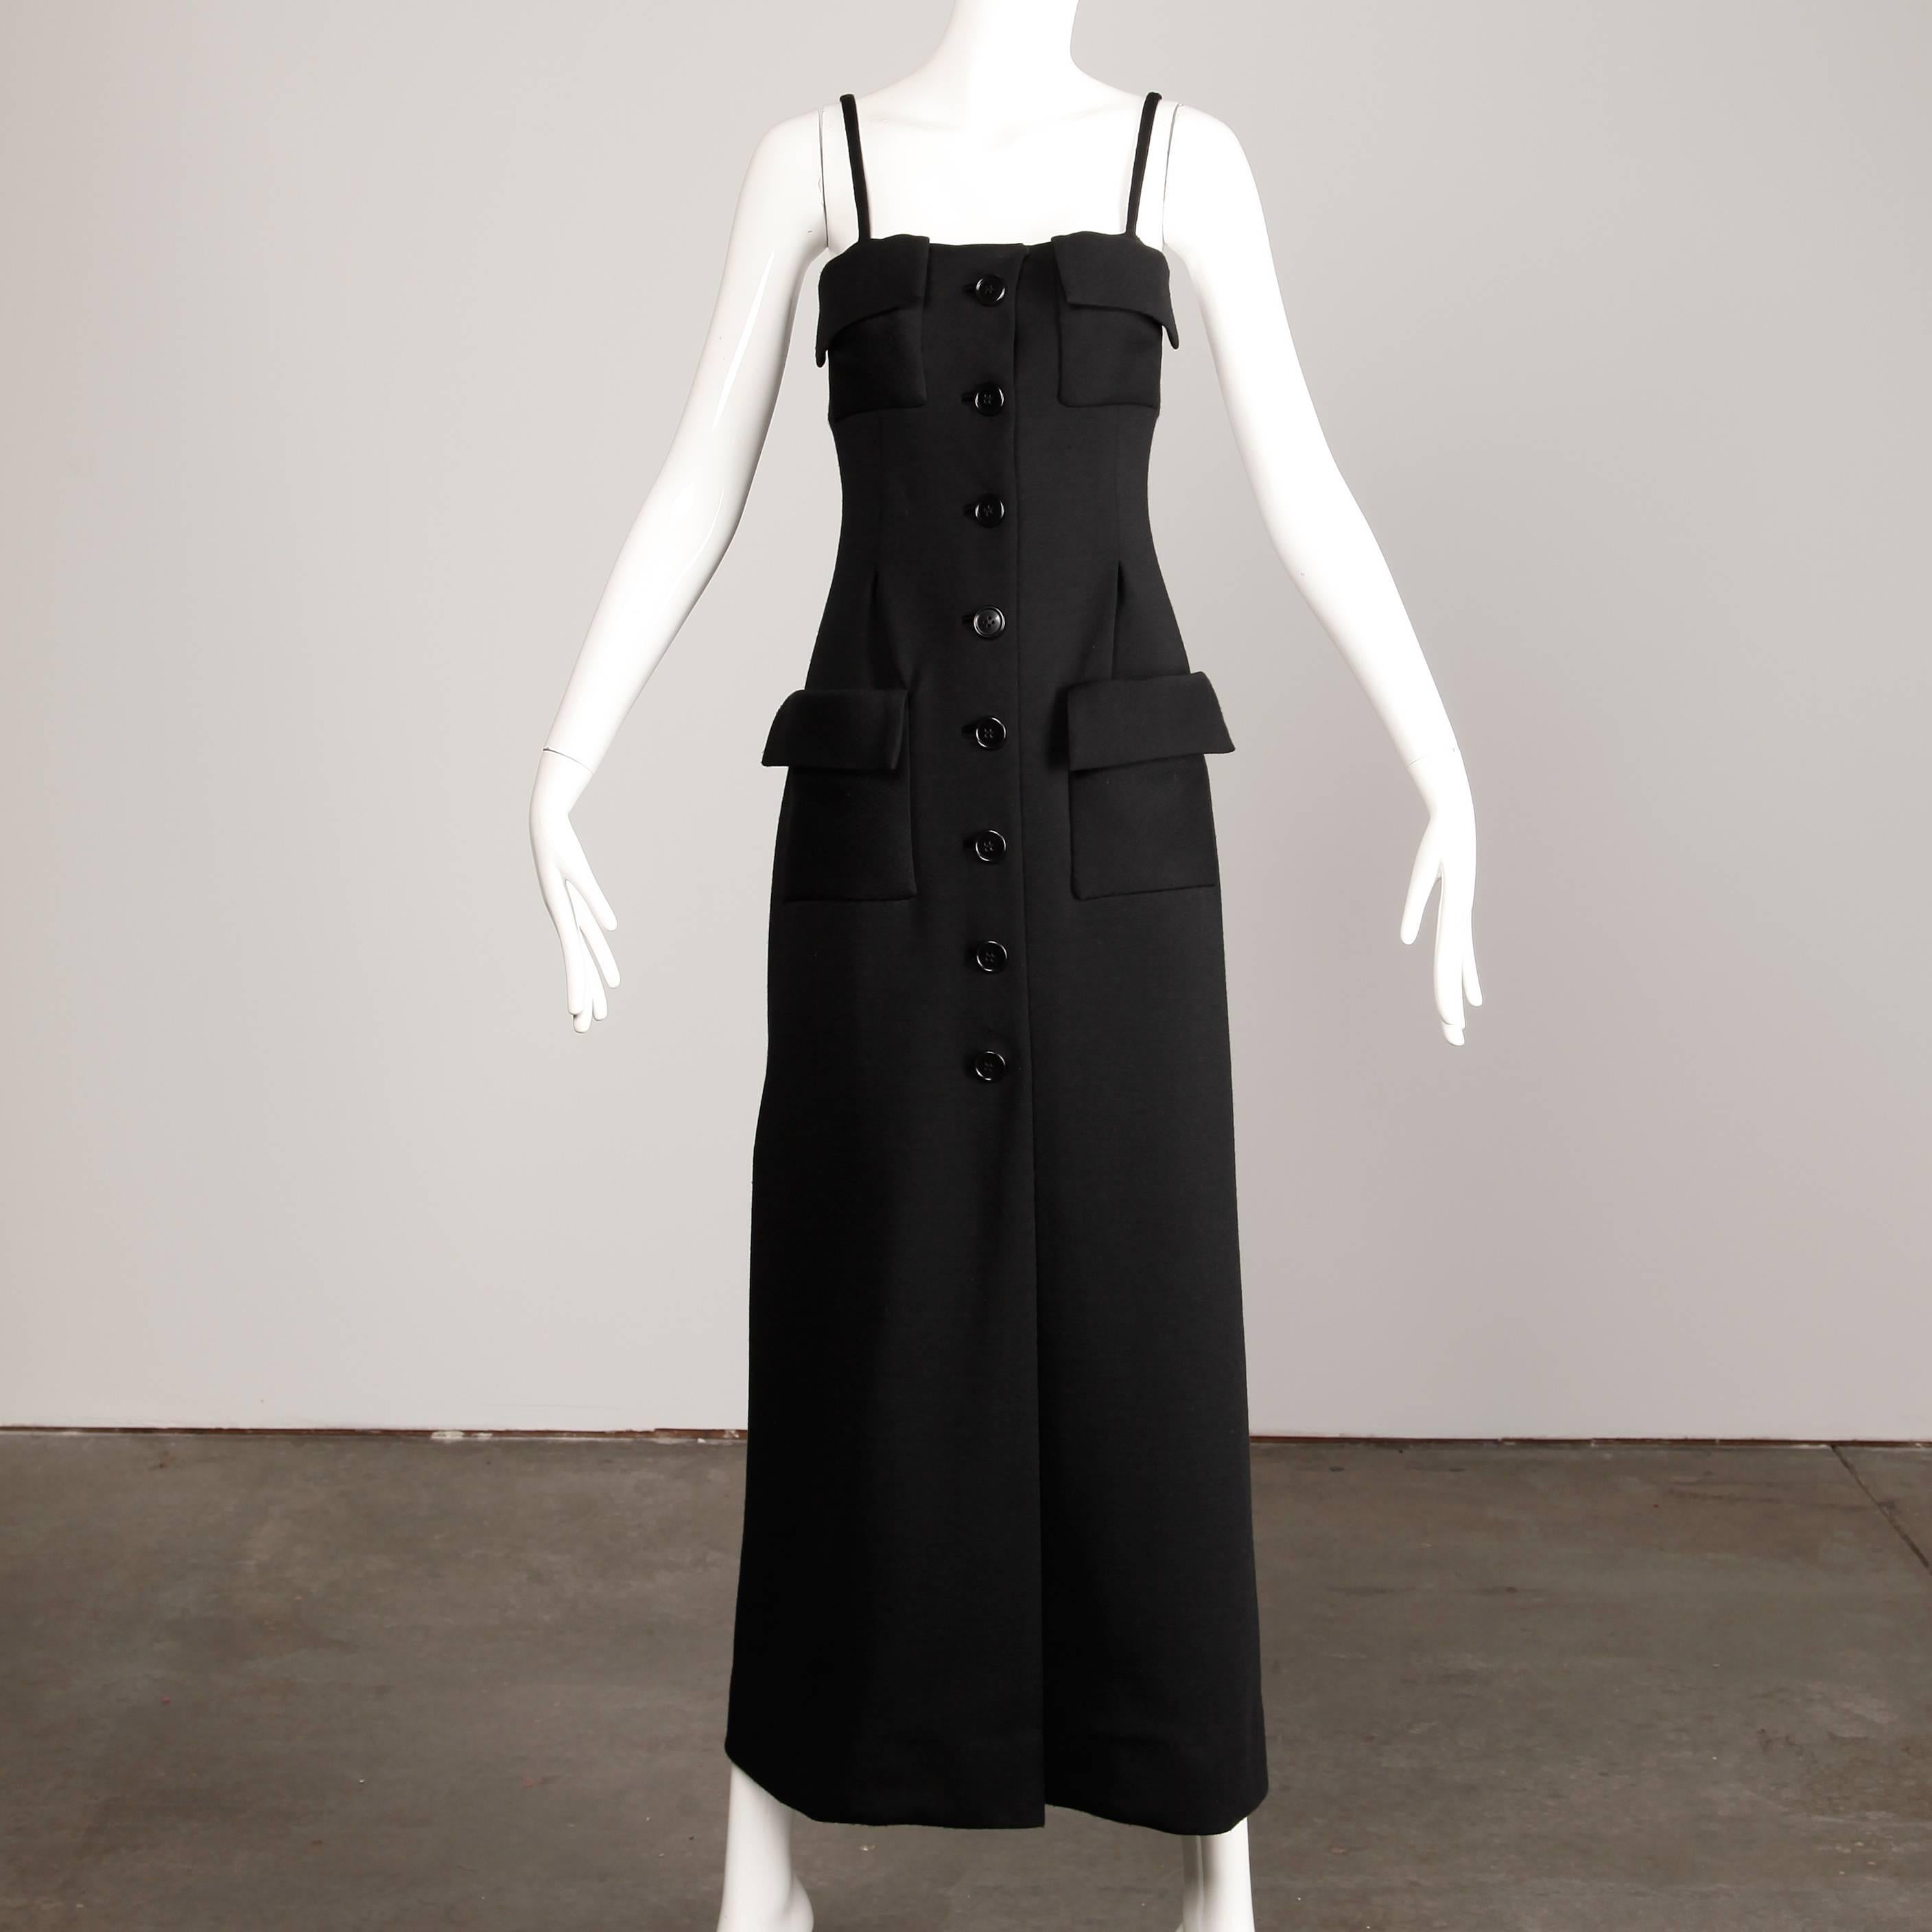 Vintage 1970s black wool maxi dress by Geoffrey Beene. Fully lined with front button and snap closure. Front patch pockets. Fits like a modern size small-medium. The bust measures 32", the waist 28.5", hips 35" and the total length is